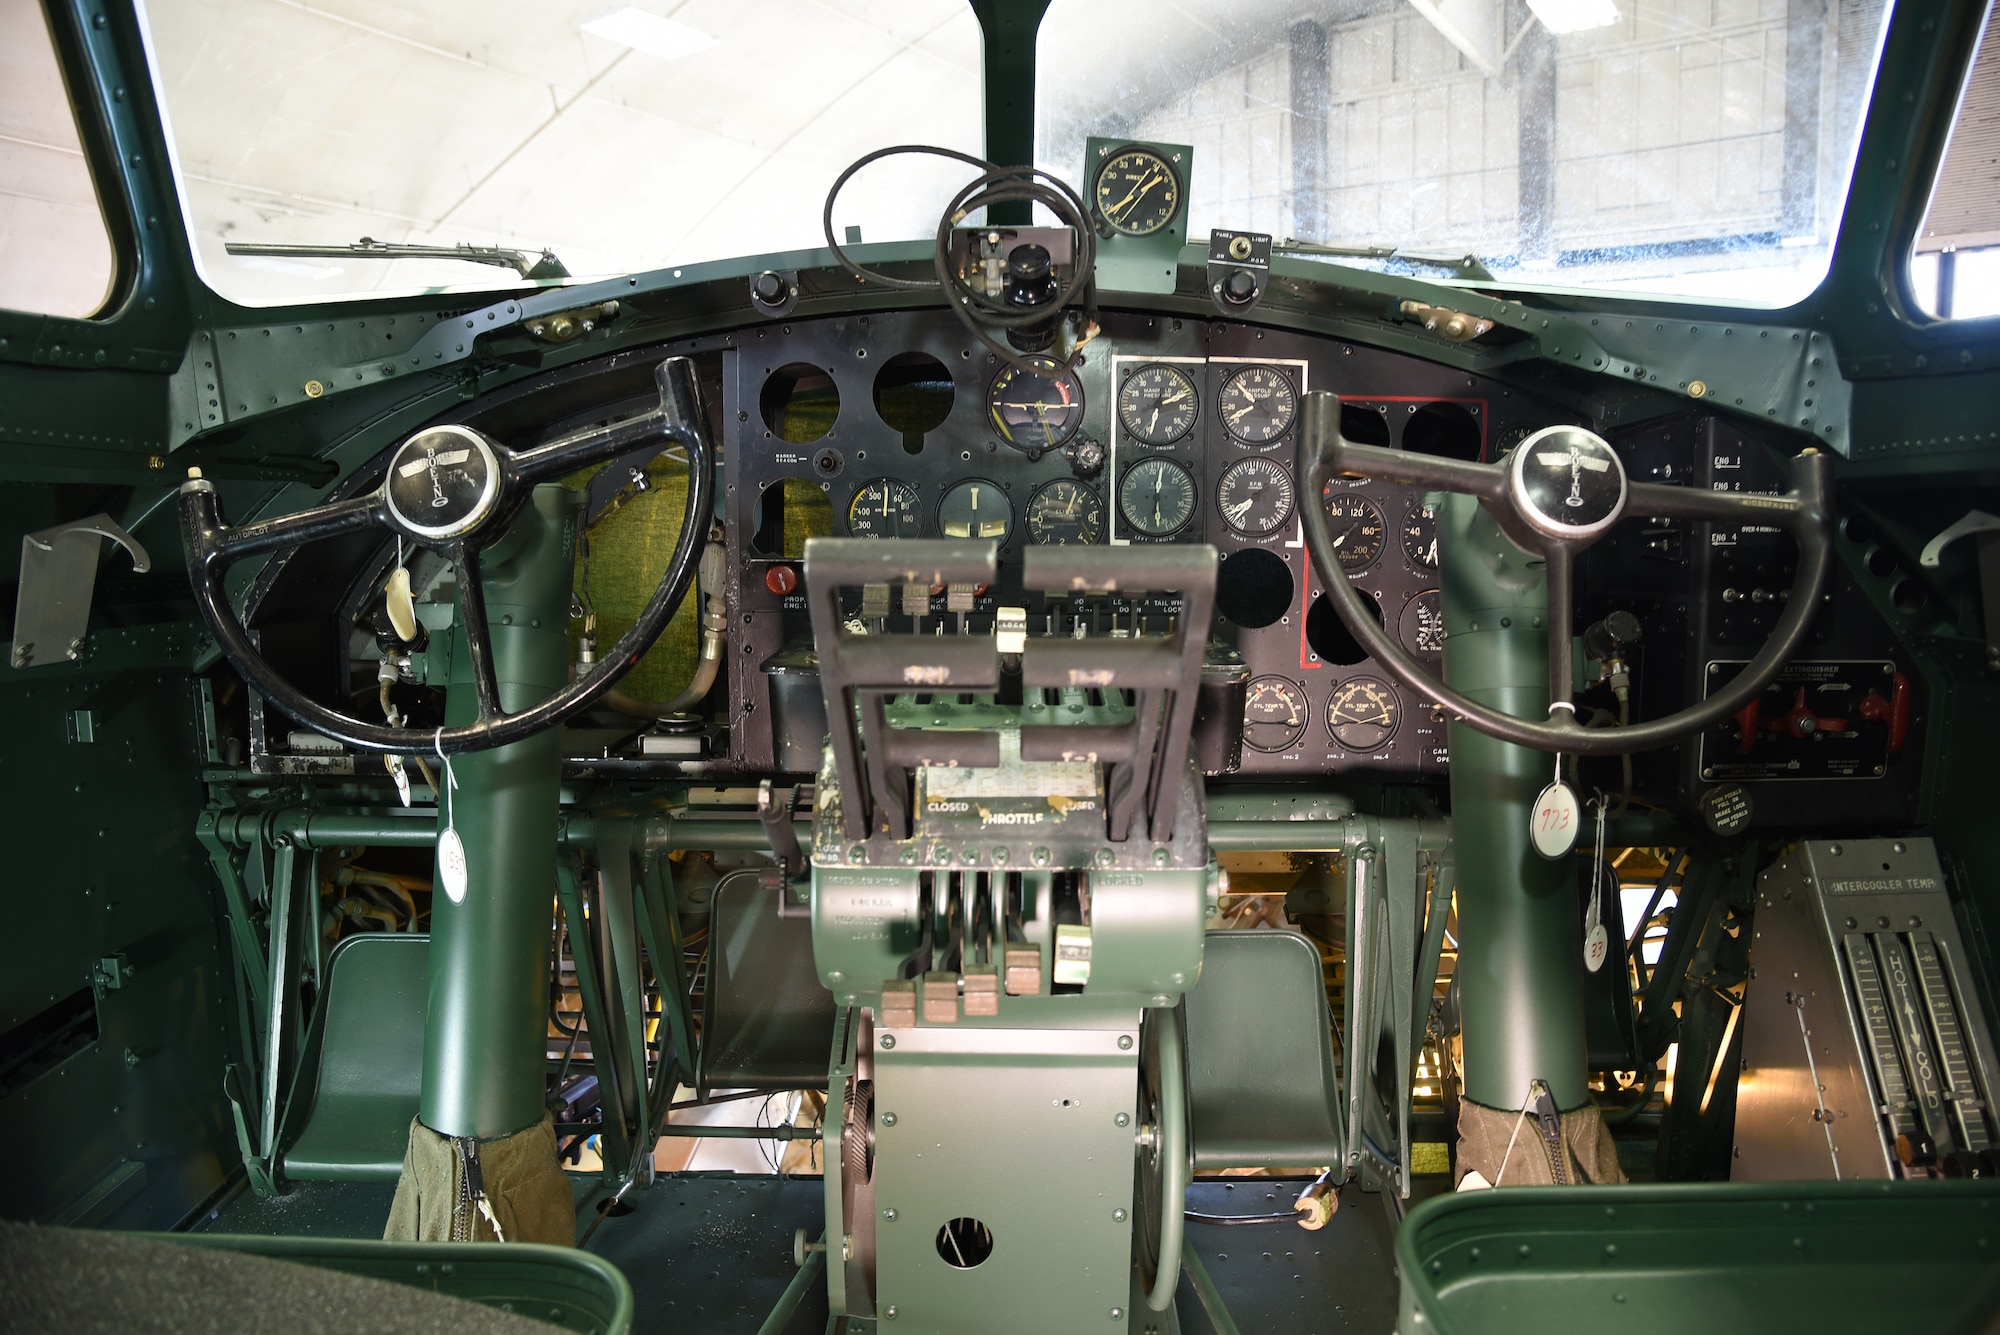 DAYTON, Ohio -- The Boeing B-17F Memphis Belle cockpit undergoing restoration on March 6, 2018 at the National Museum of the U.S. Air Force's restoration hangar. (U.S. Air Force photo by Ken LaRock)